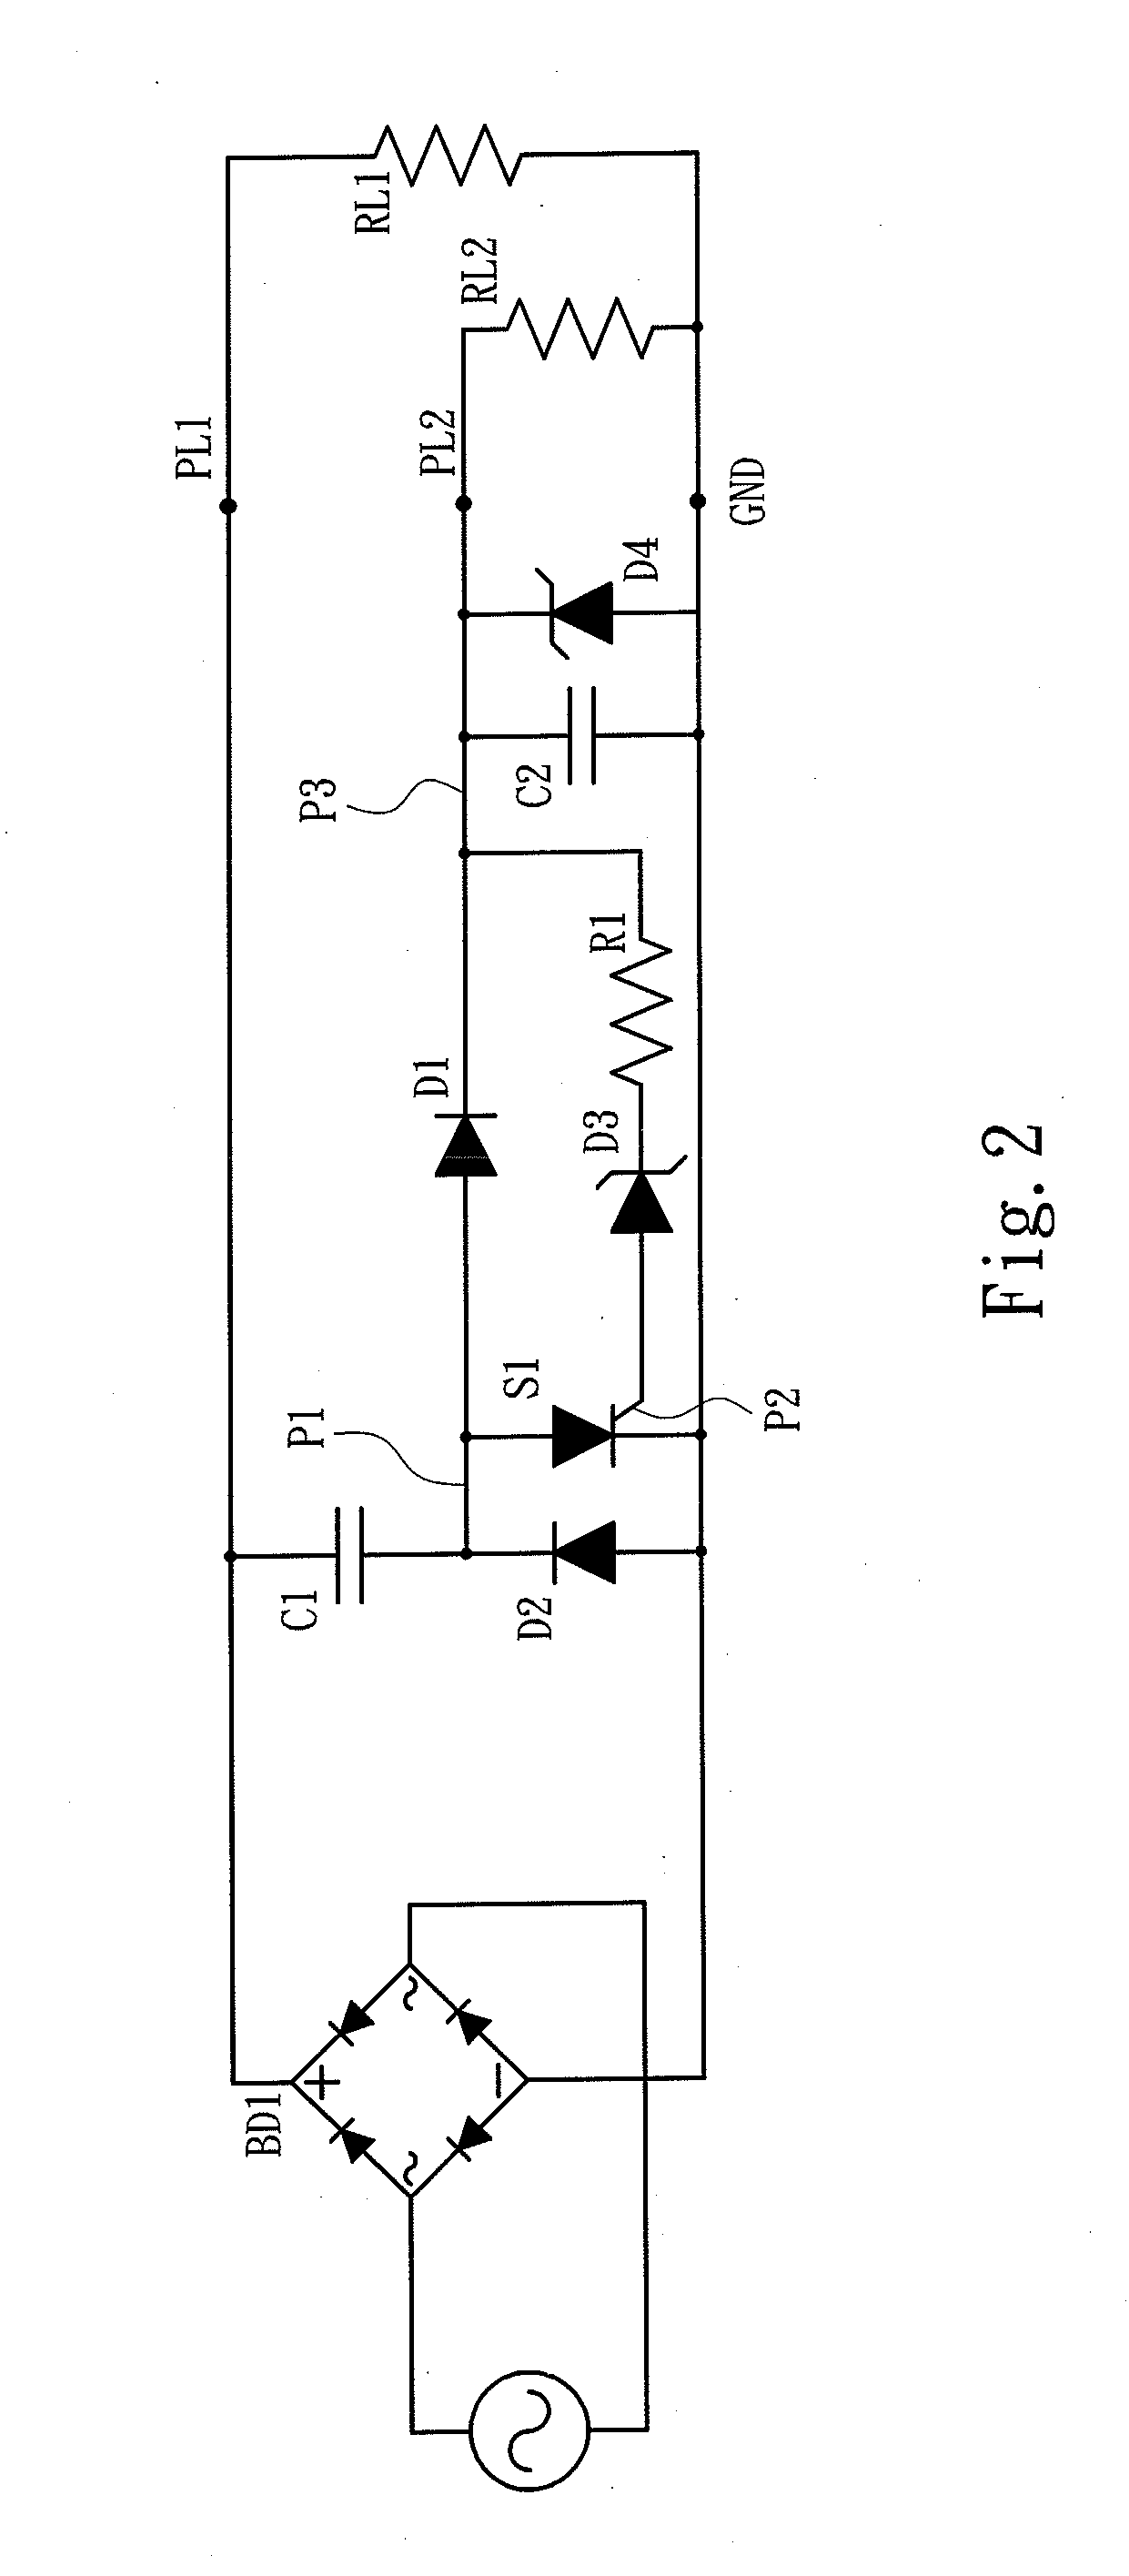 Auxiliary power generation circuit